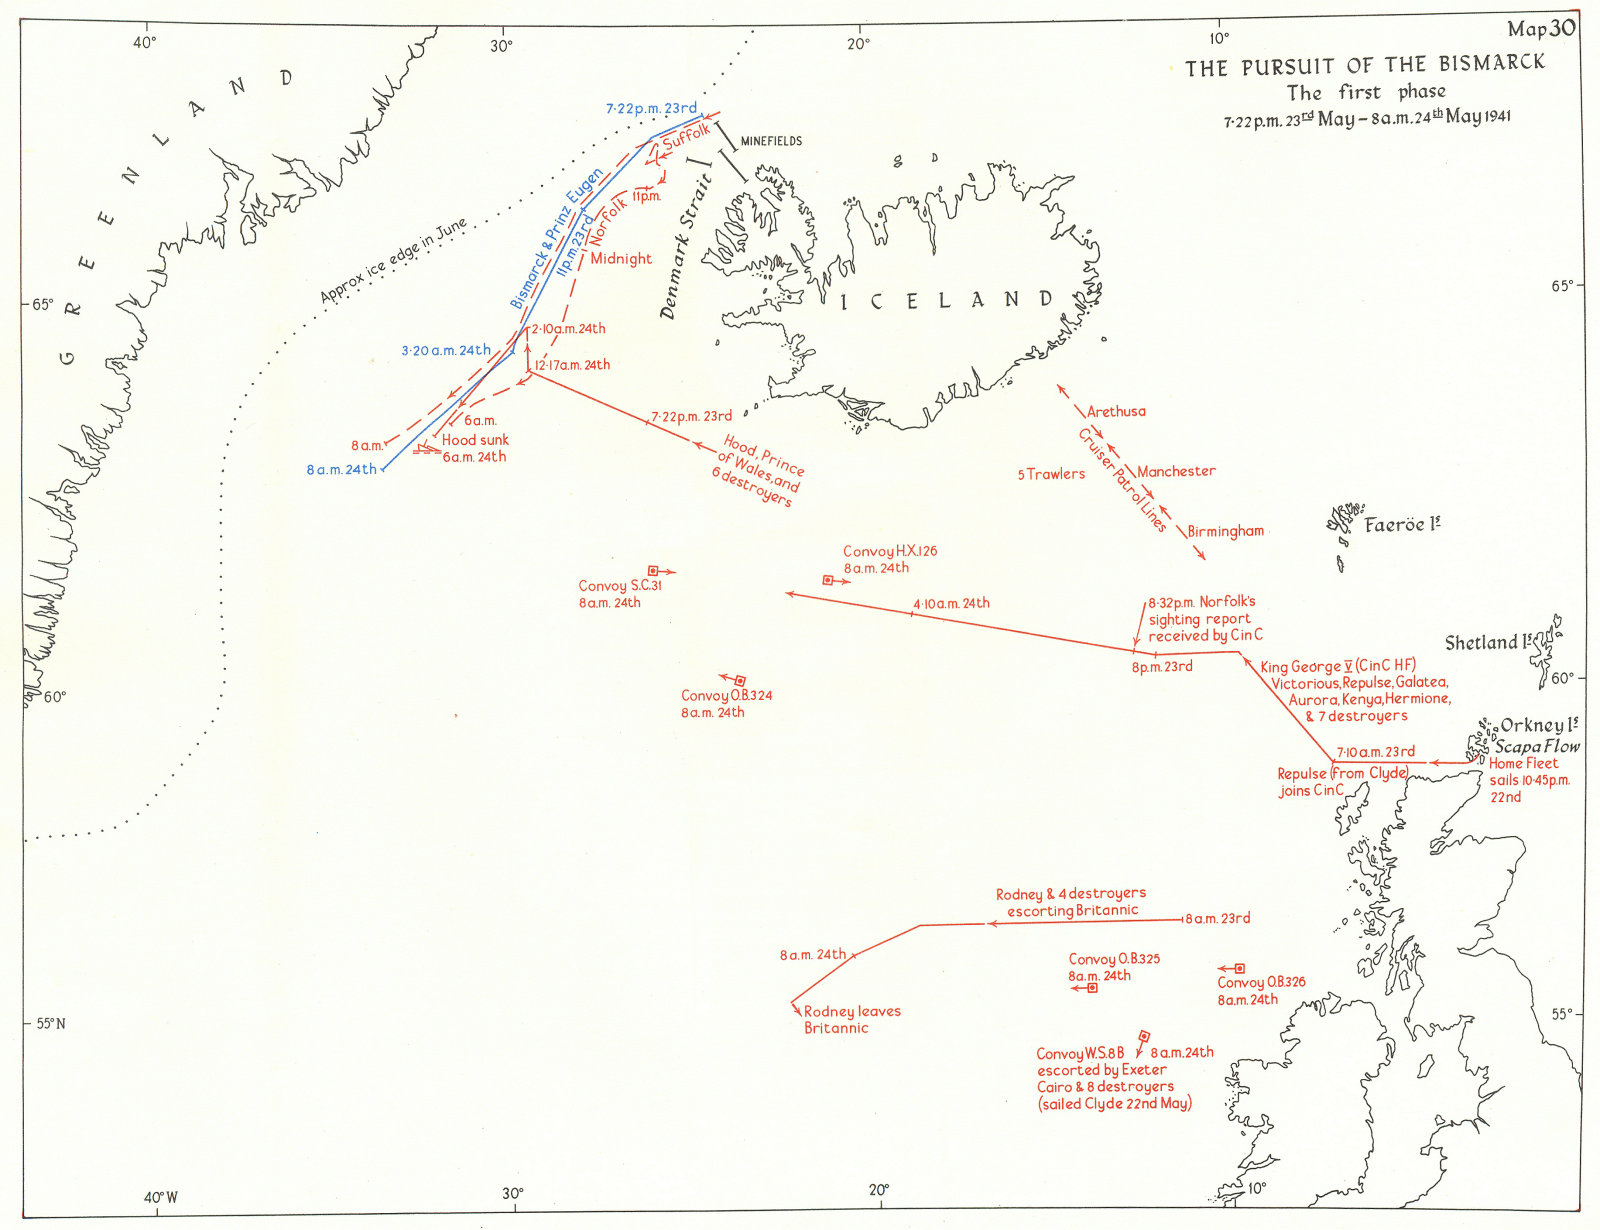 ICELAND. Pursuit of Bismarck 1st phase 7 22 pm 23rd May-8 am 24th 1941 1954 map